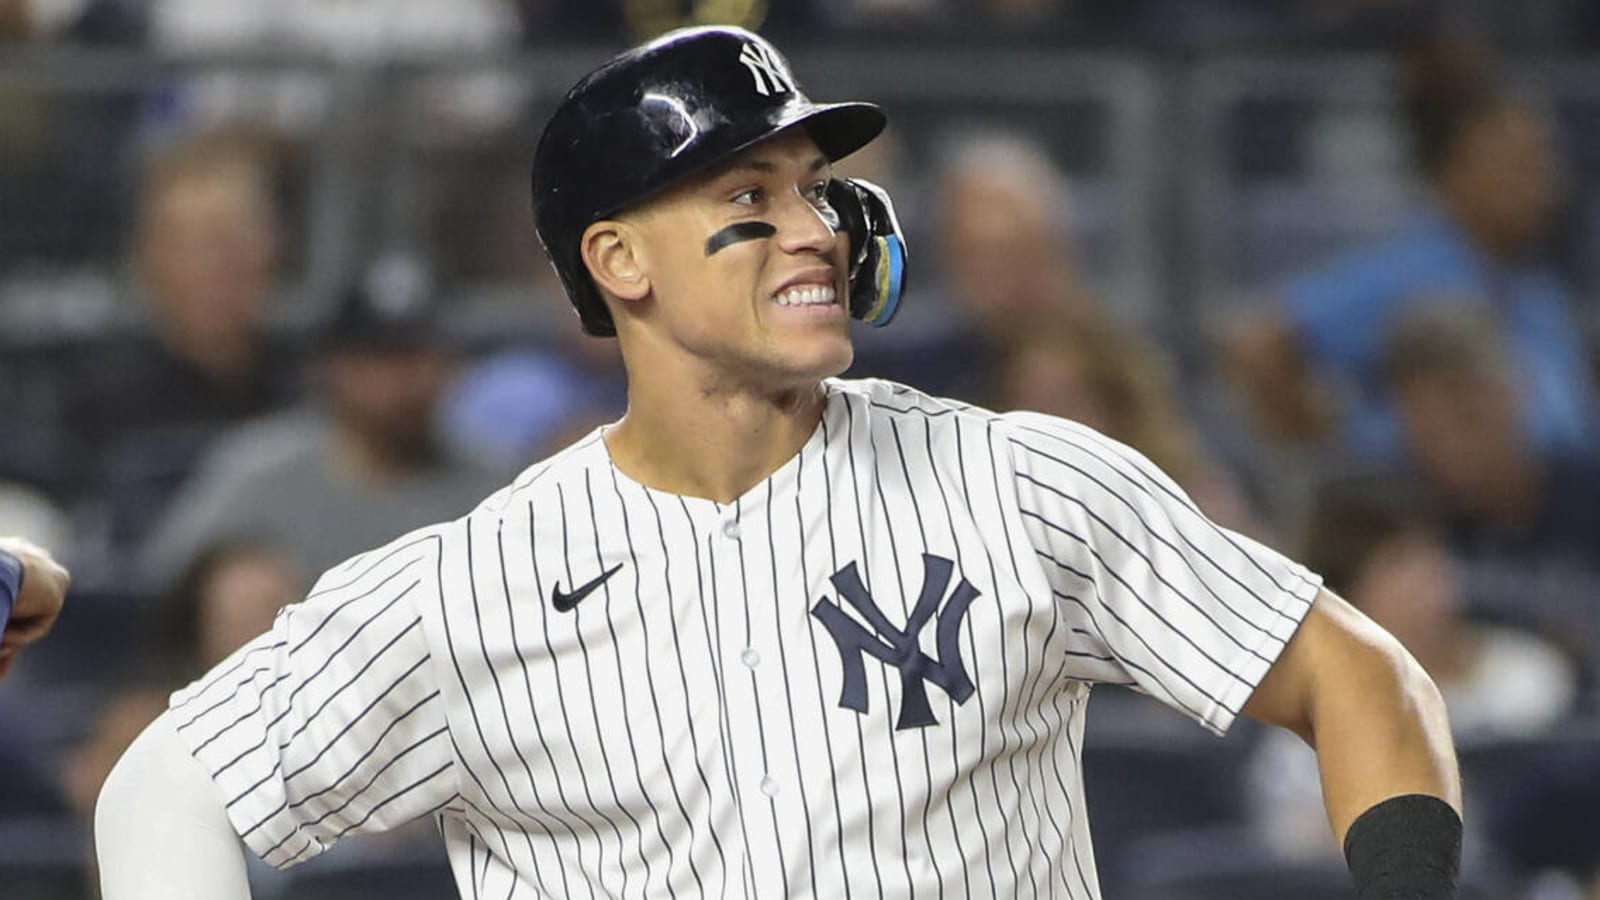 Report: Giants to pursue top free agent shortstops if unable to sign Aaron Judge